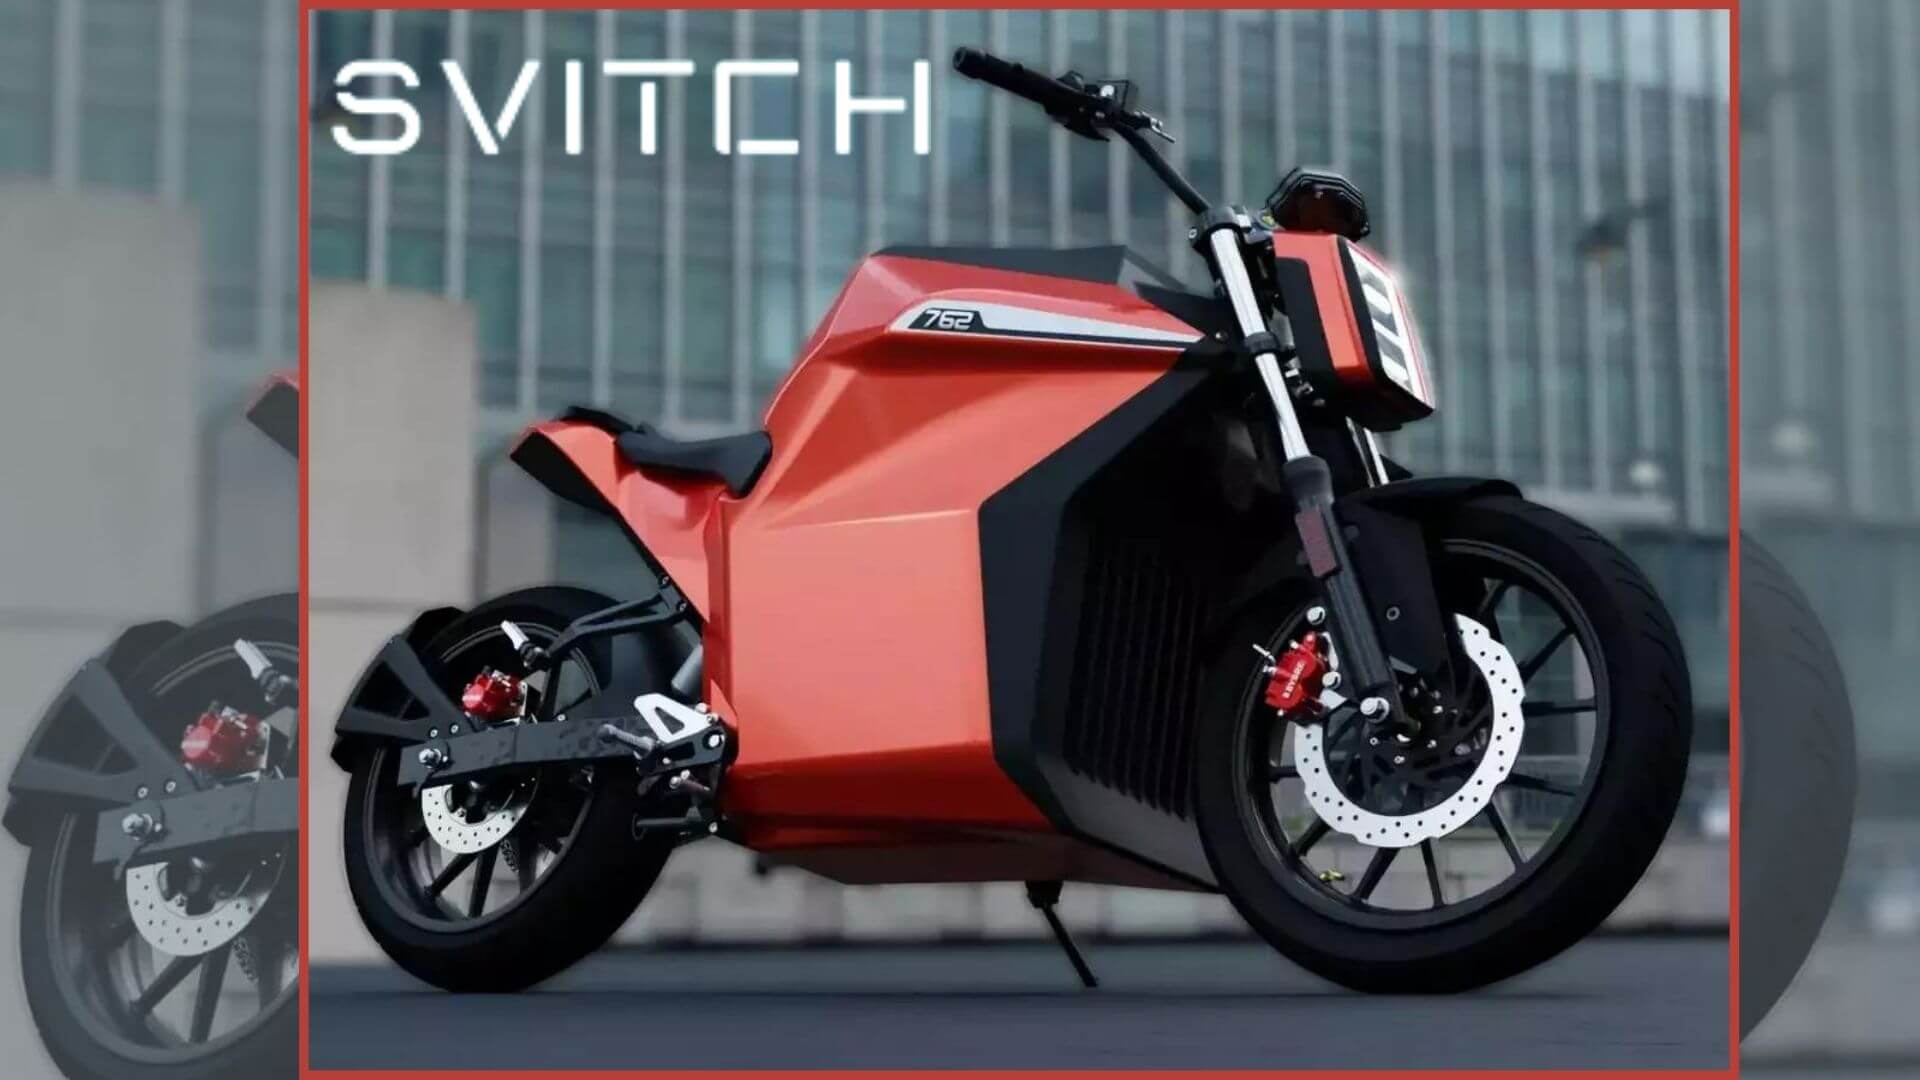 https://e-vehicleinfo.com/svitch-electric-motorcycle-price-and-launch/